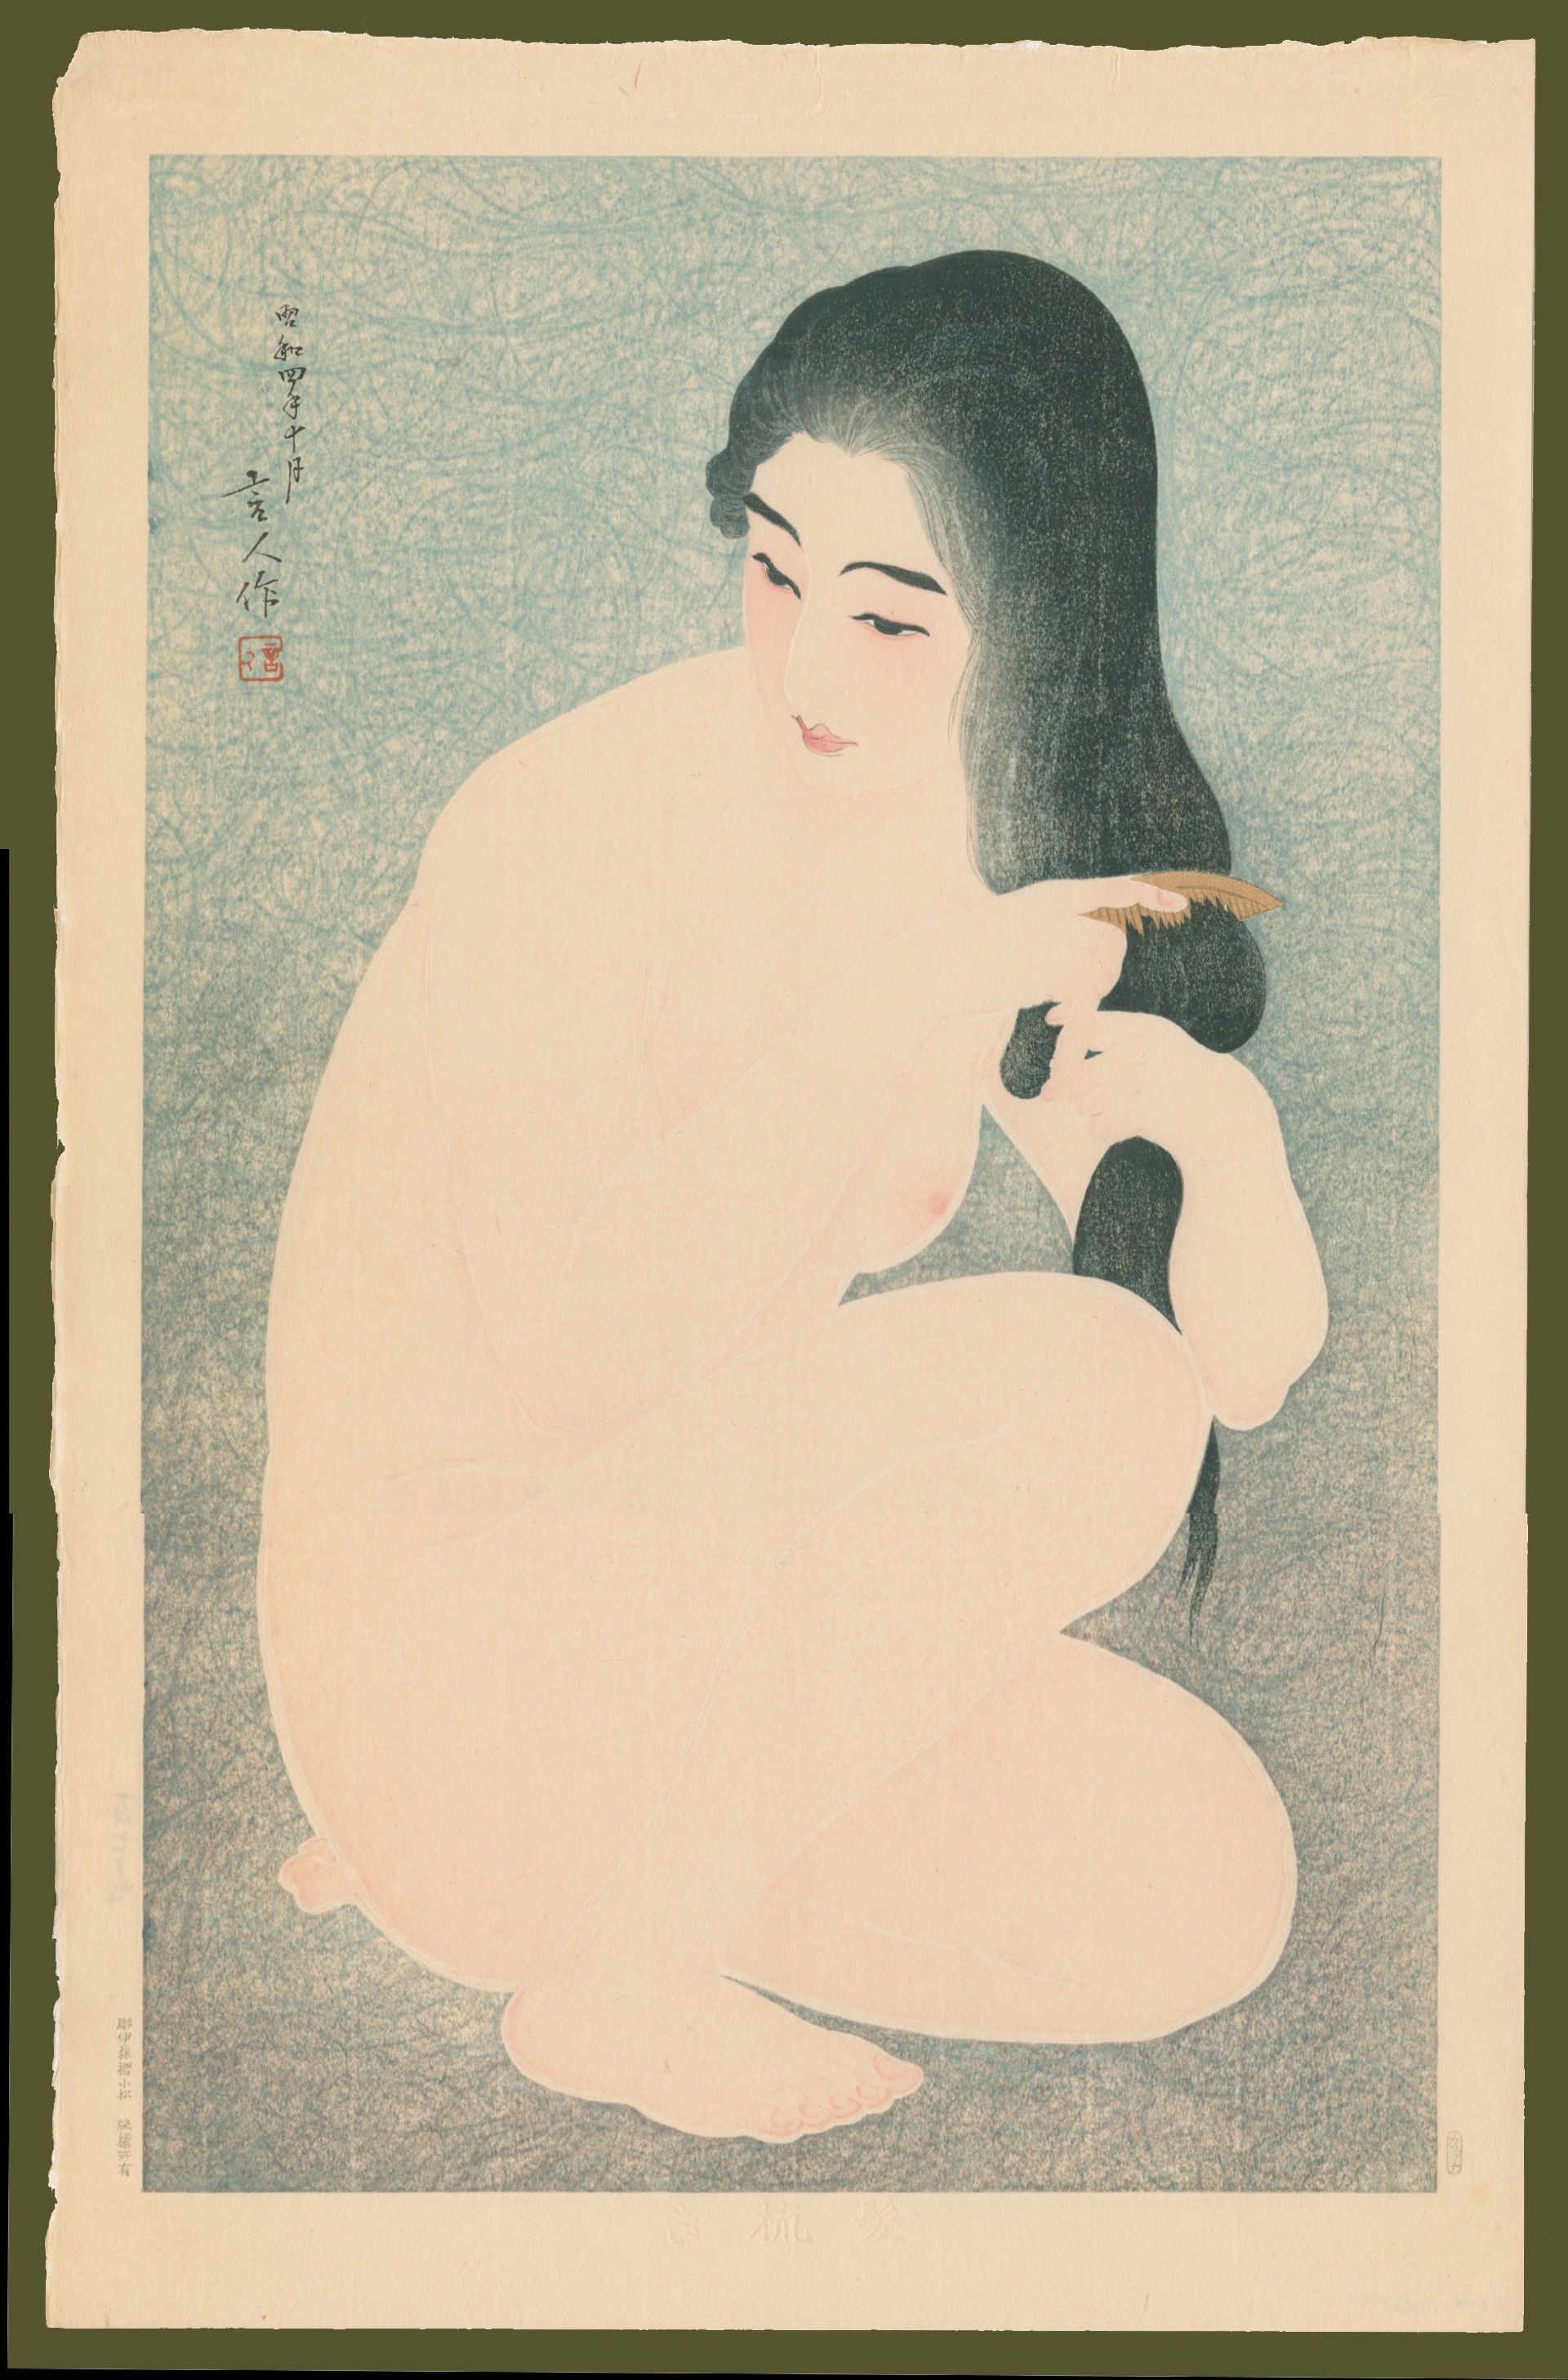 Combing her hair 177/300 by Torii Kotondo